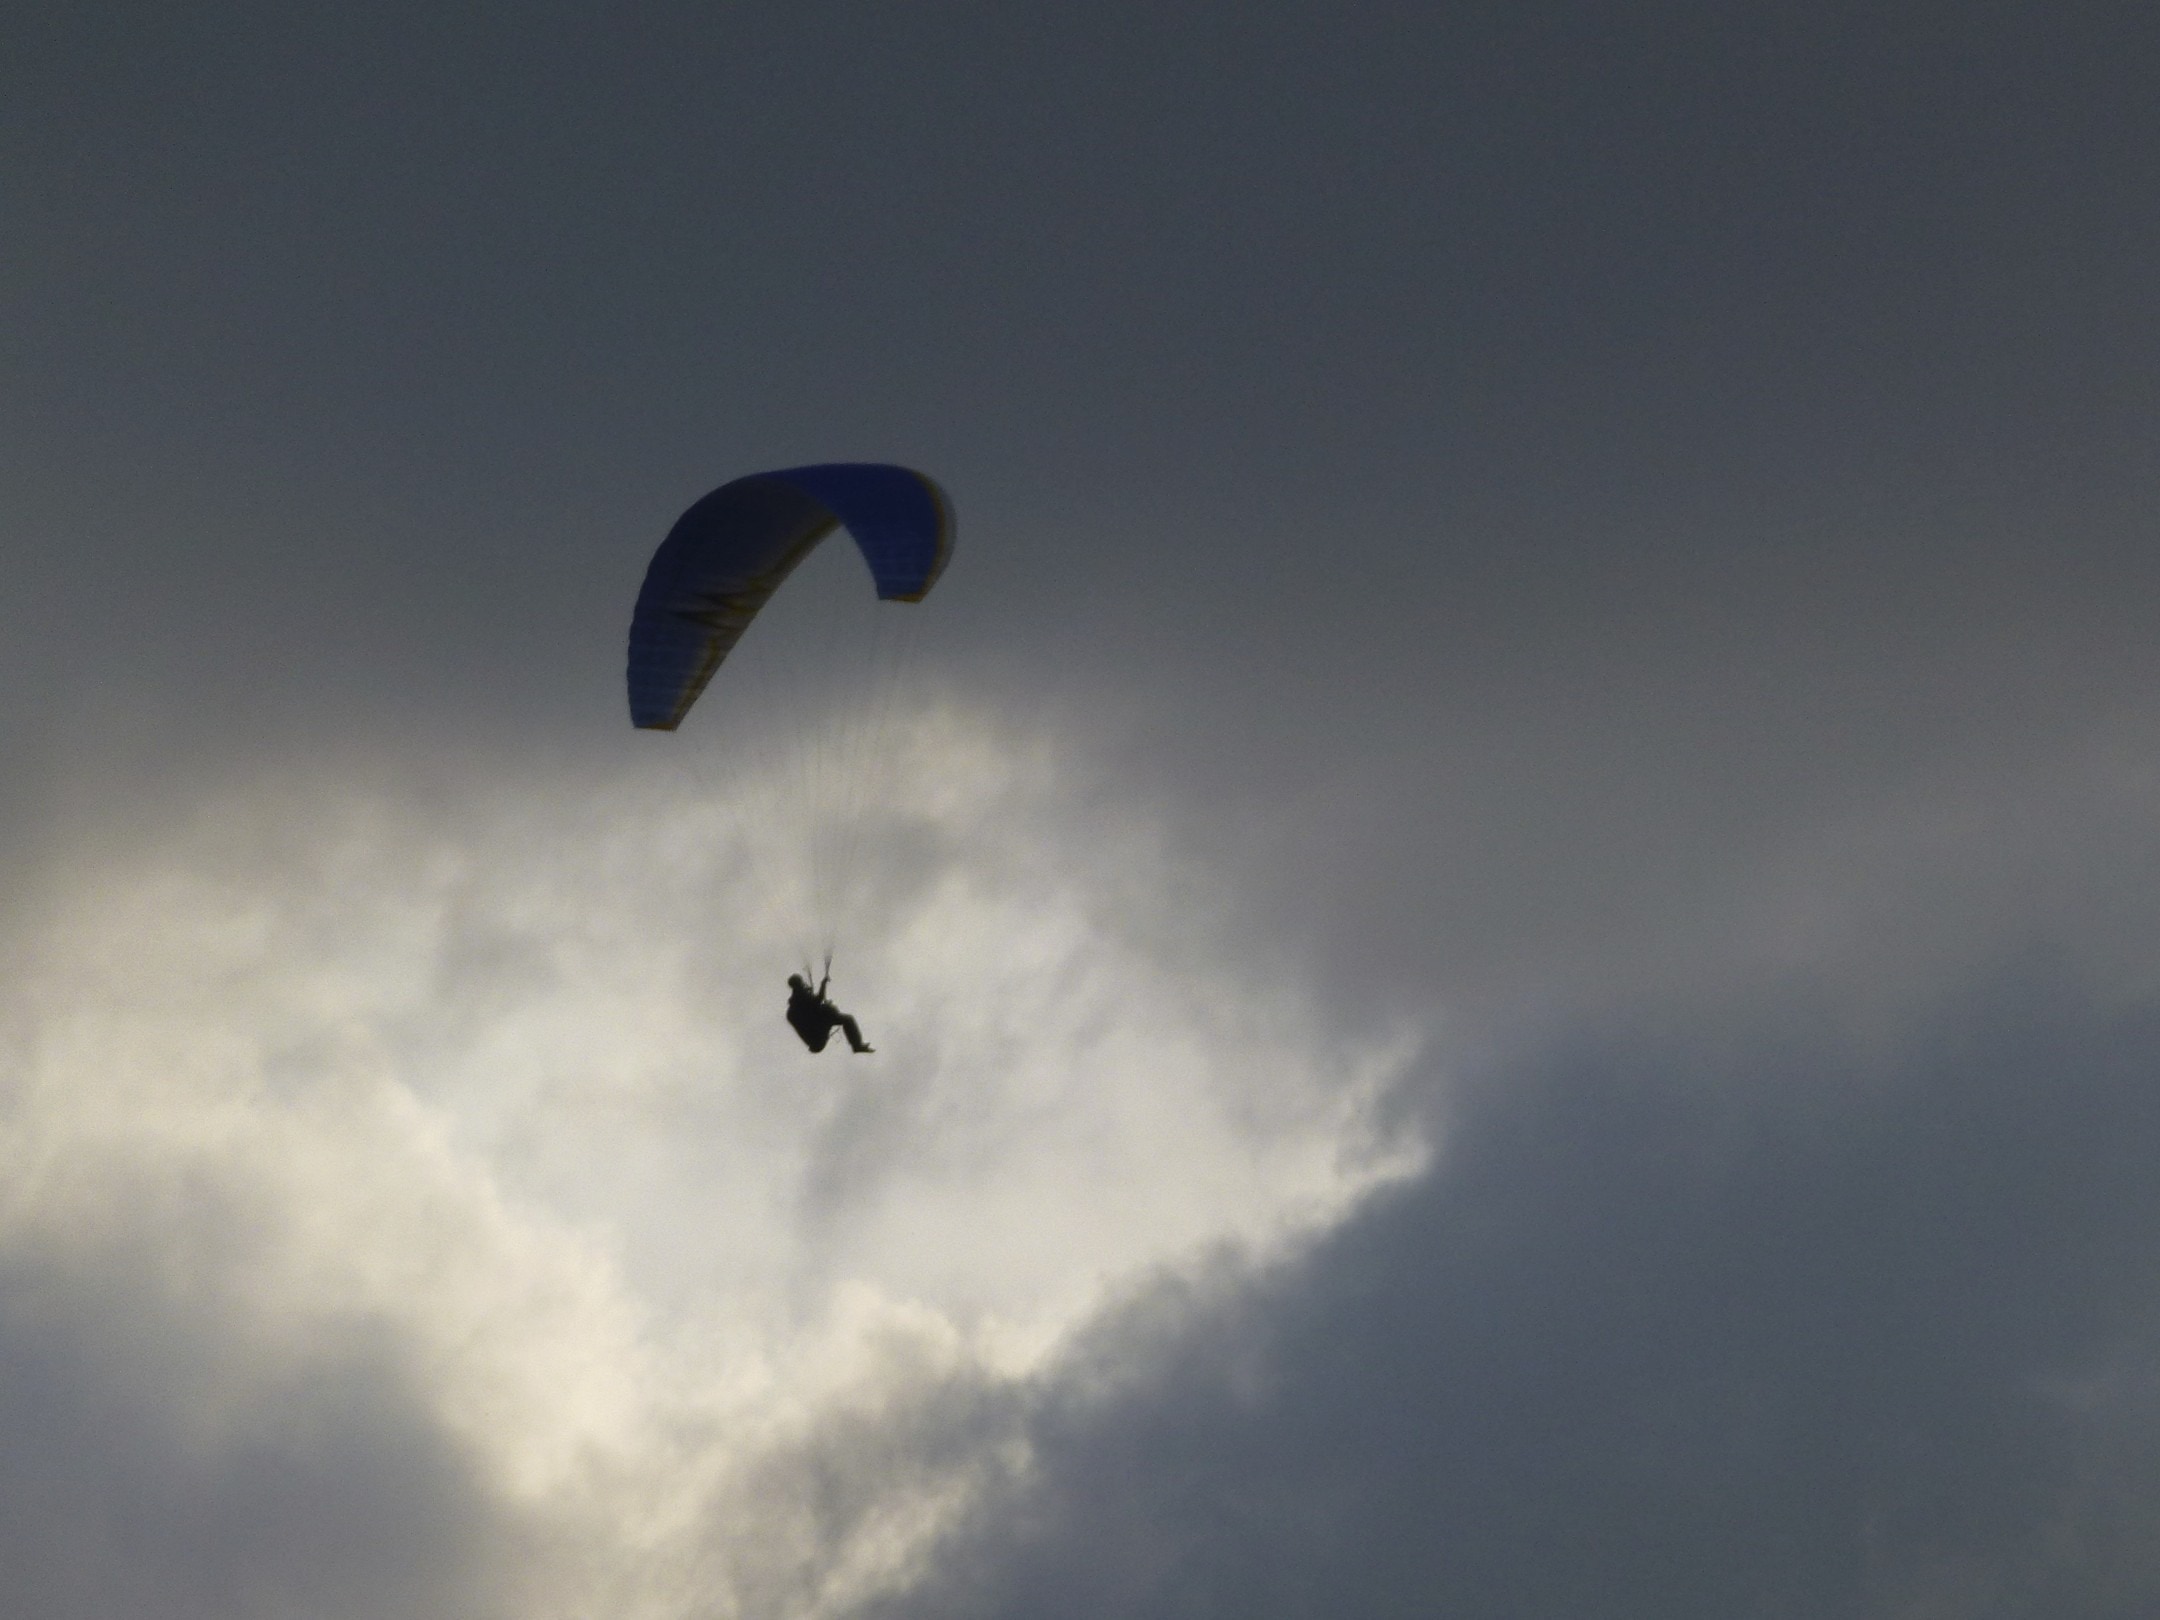 person parachute under gray and white sky